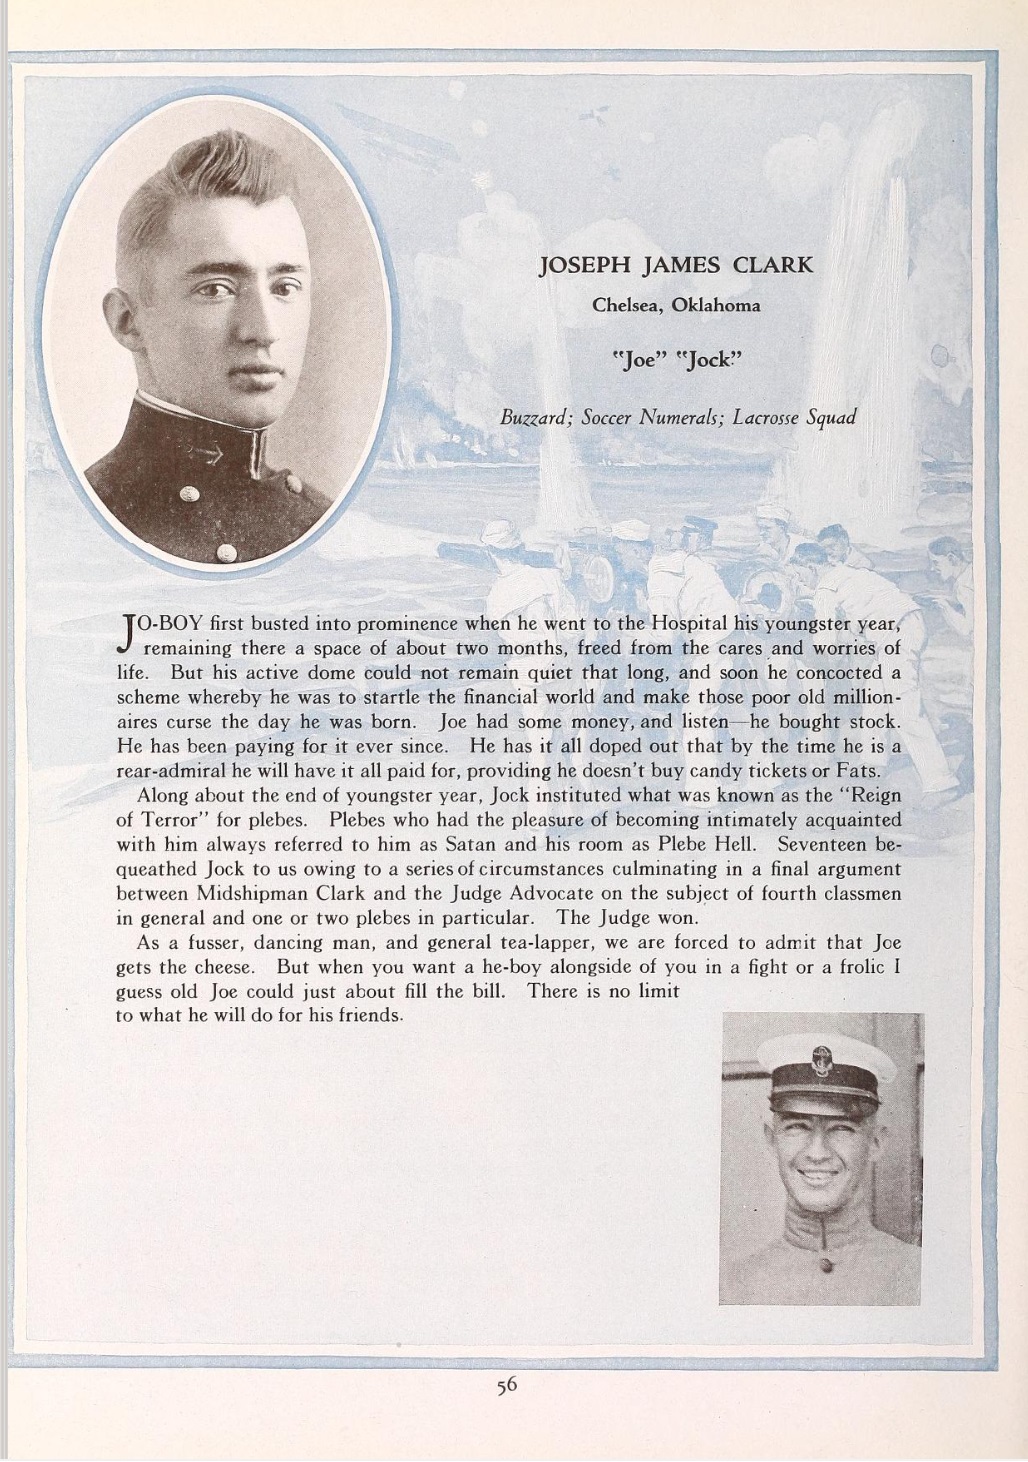 Cadet J.J. Clark’s page from the Naval Academy’s ‘Lucky Bag’ yearbook for the class of 1918 (graduated early in 1917).